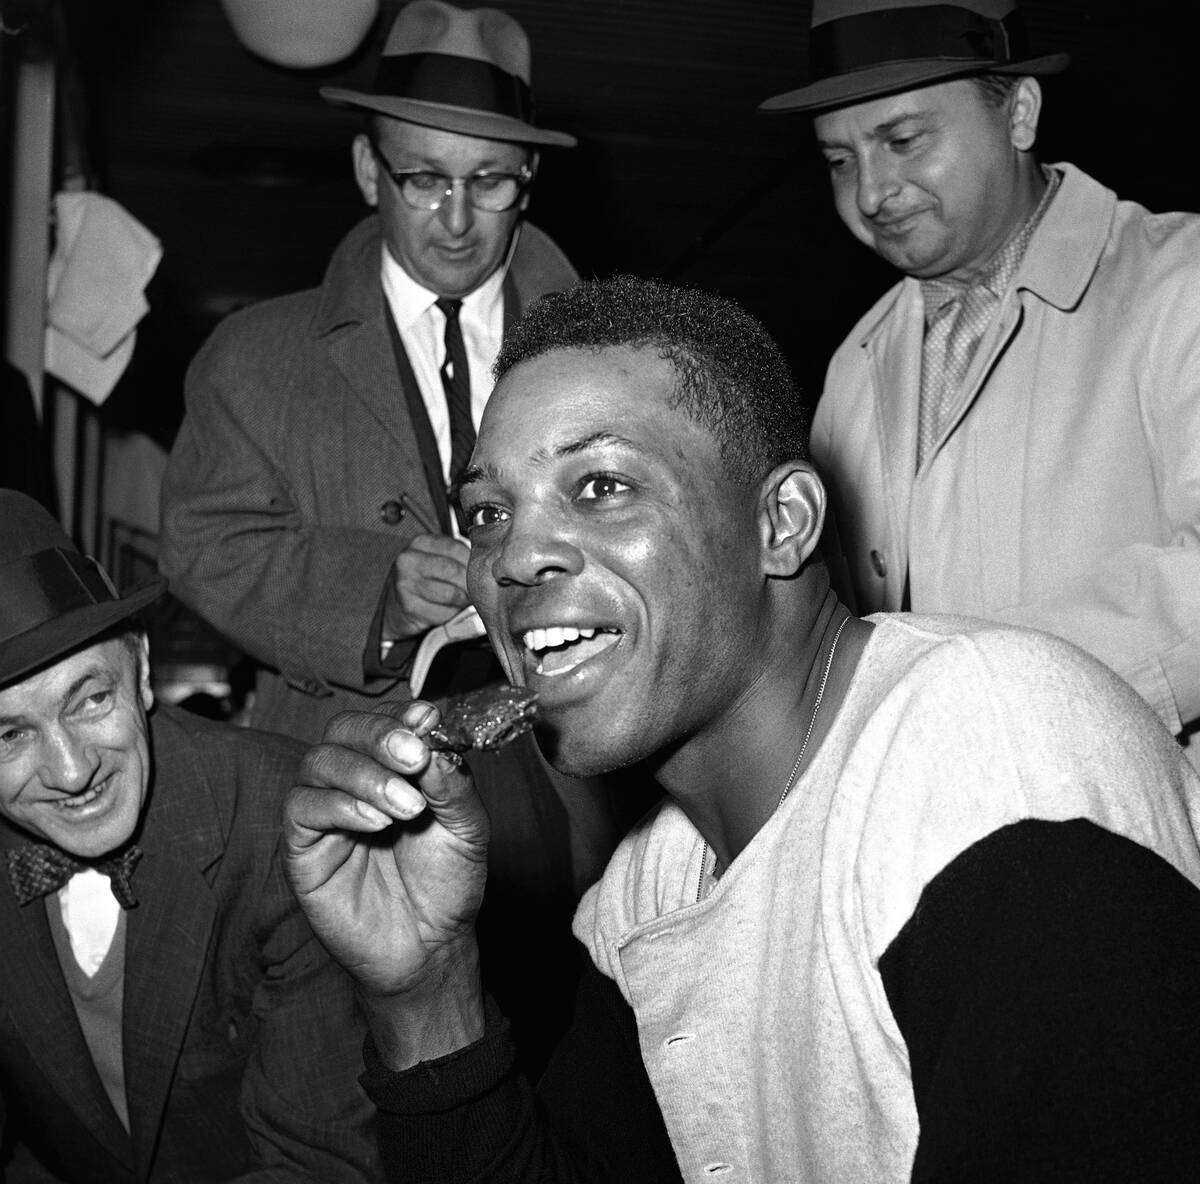 Giants outfielder, Willie Mays, smiles happily in the dressing room after he hit four home runs ...